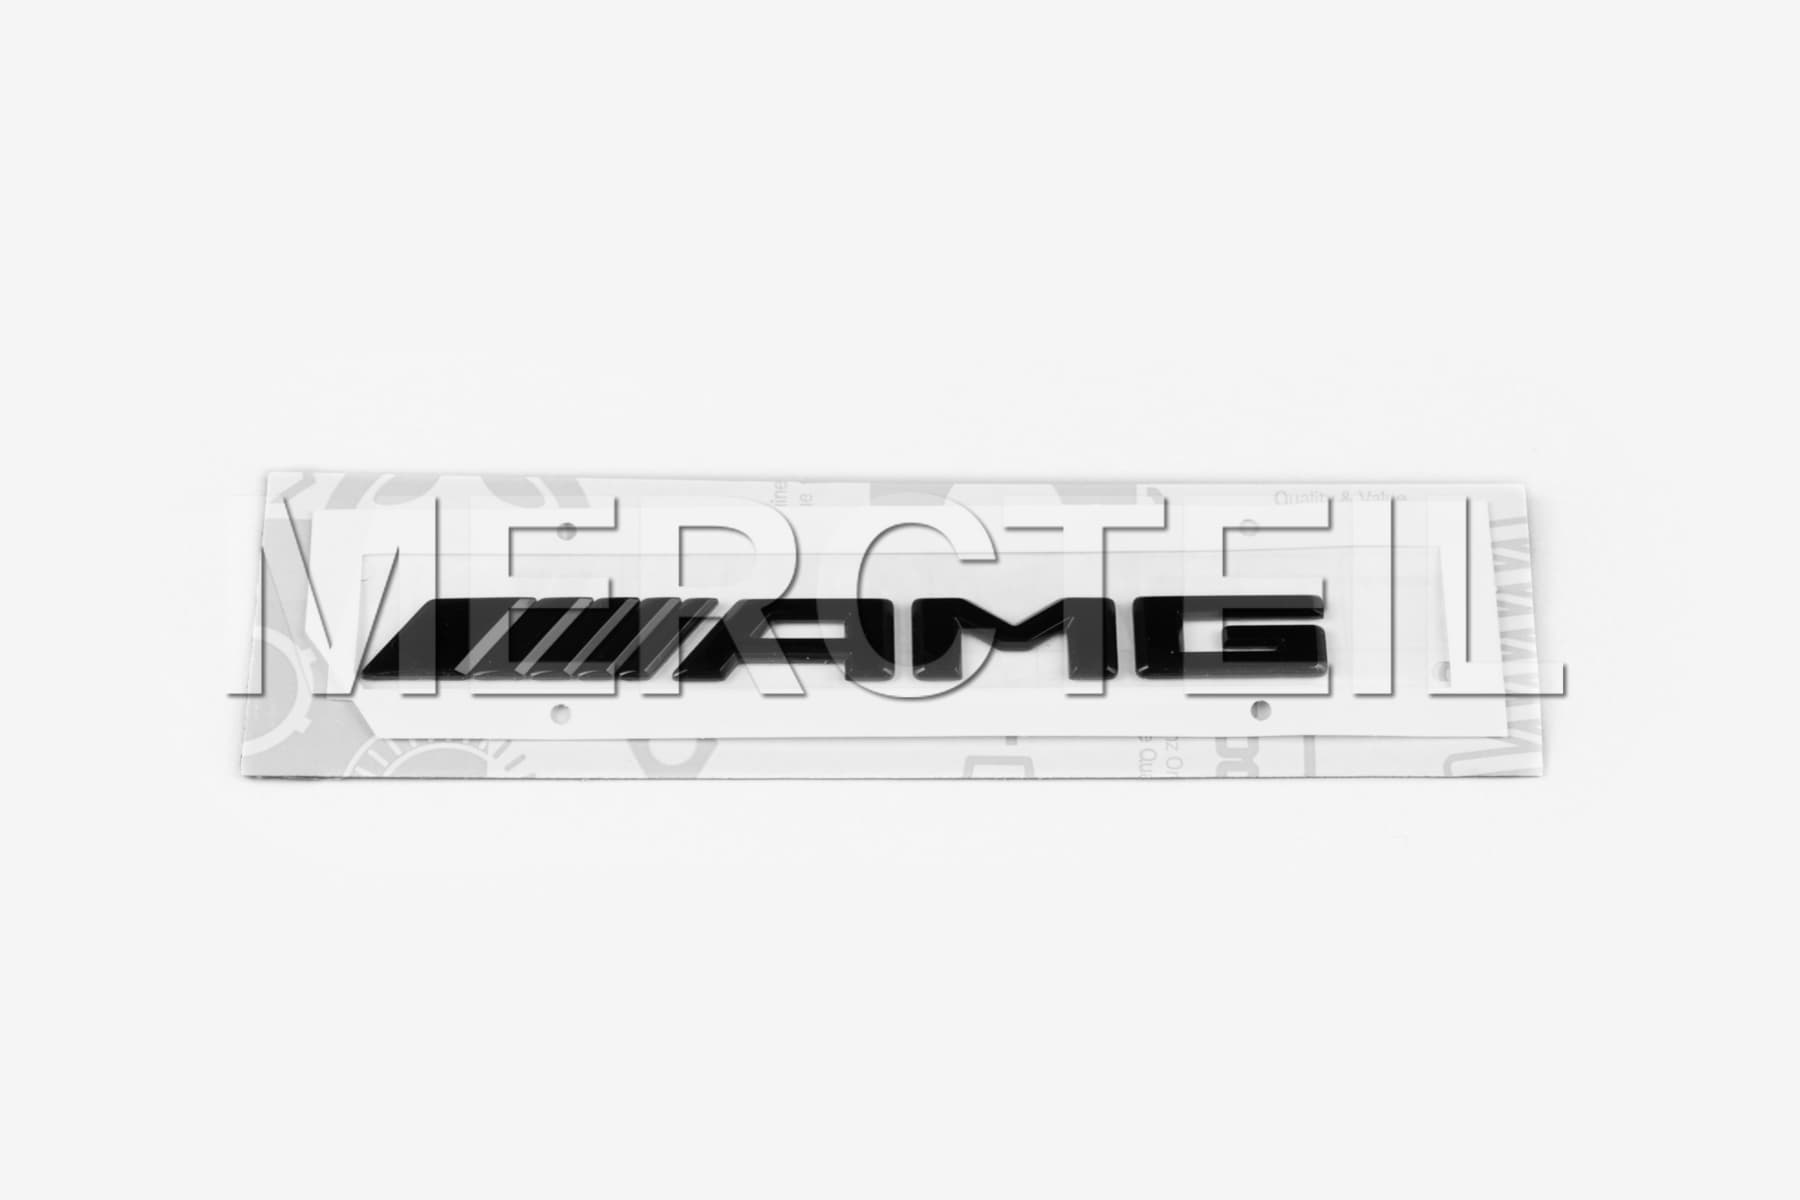 CLA Class CLA45 AMG Logo Lettering Black Genuine Mercedes Benz (part number: 	
A1188173100)